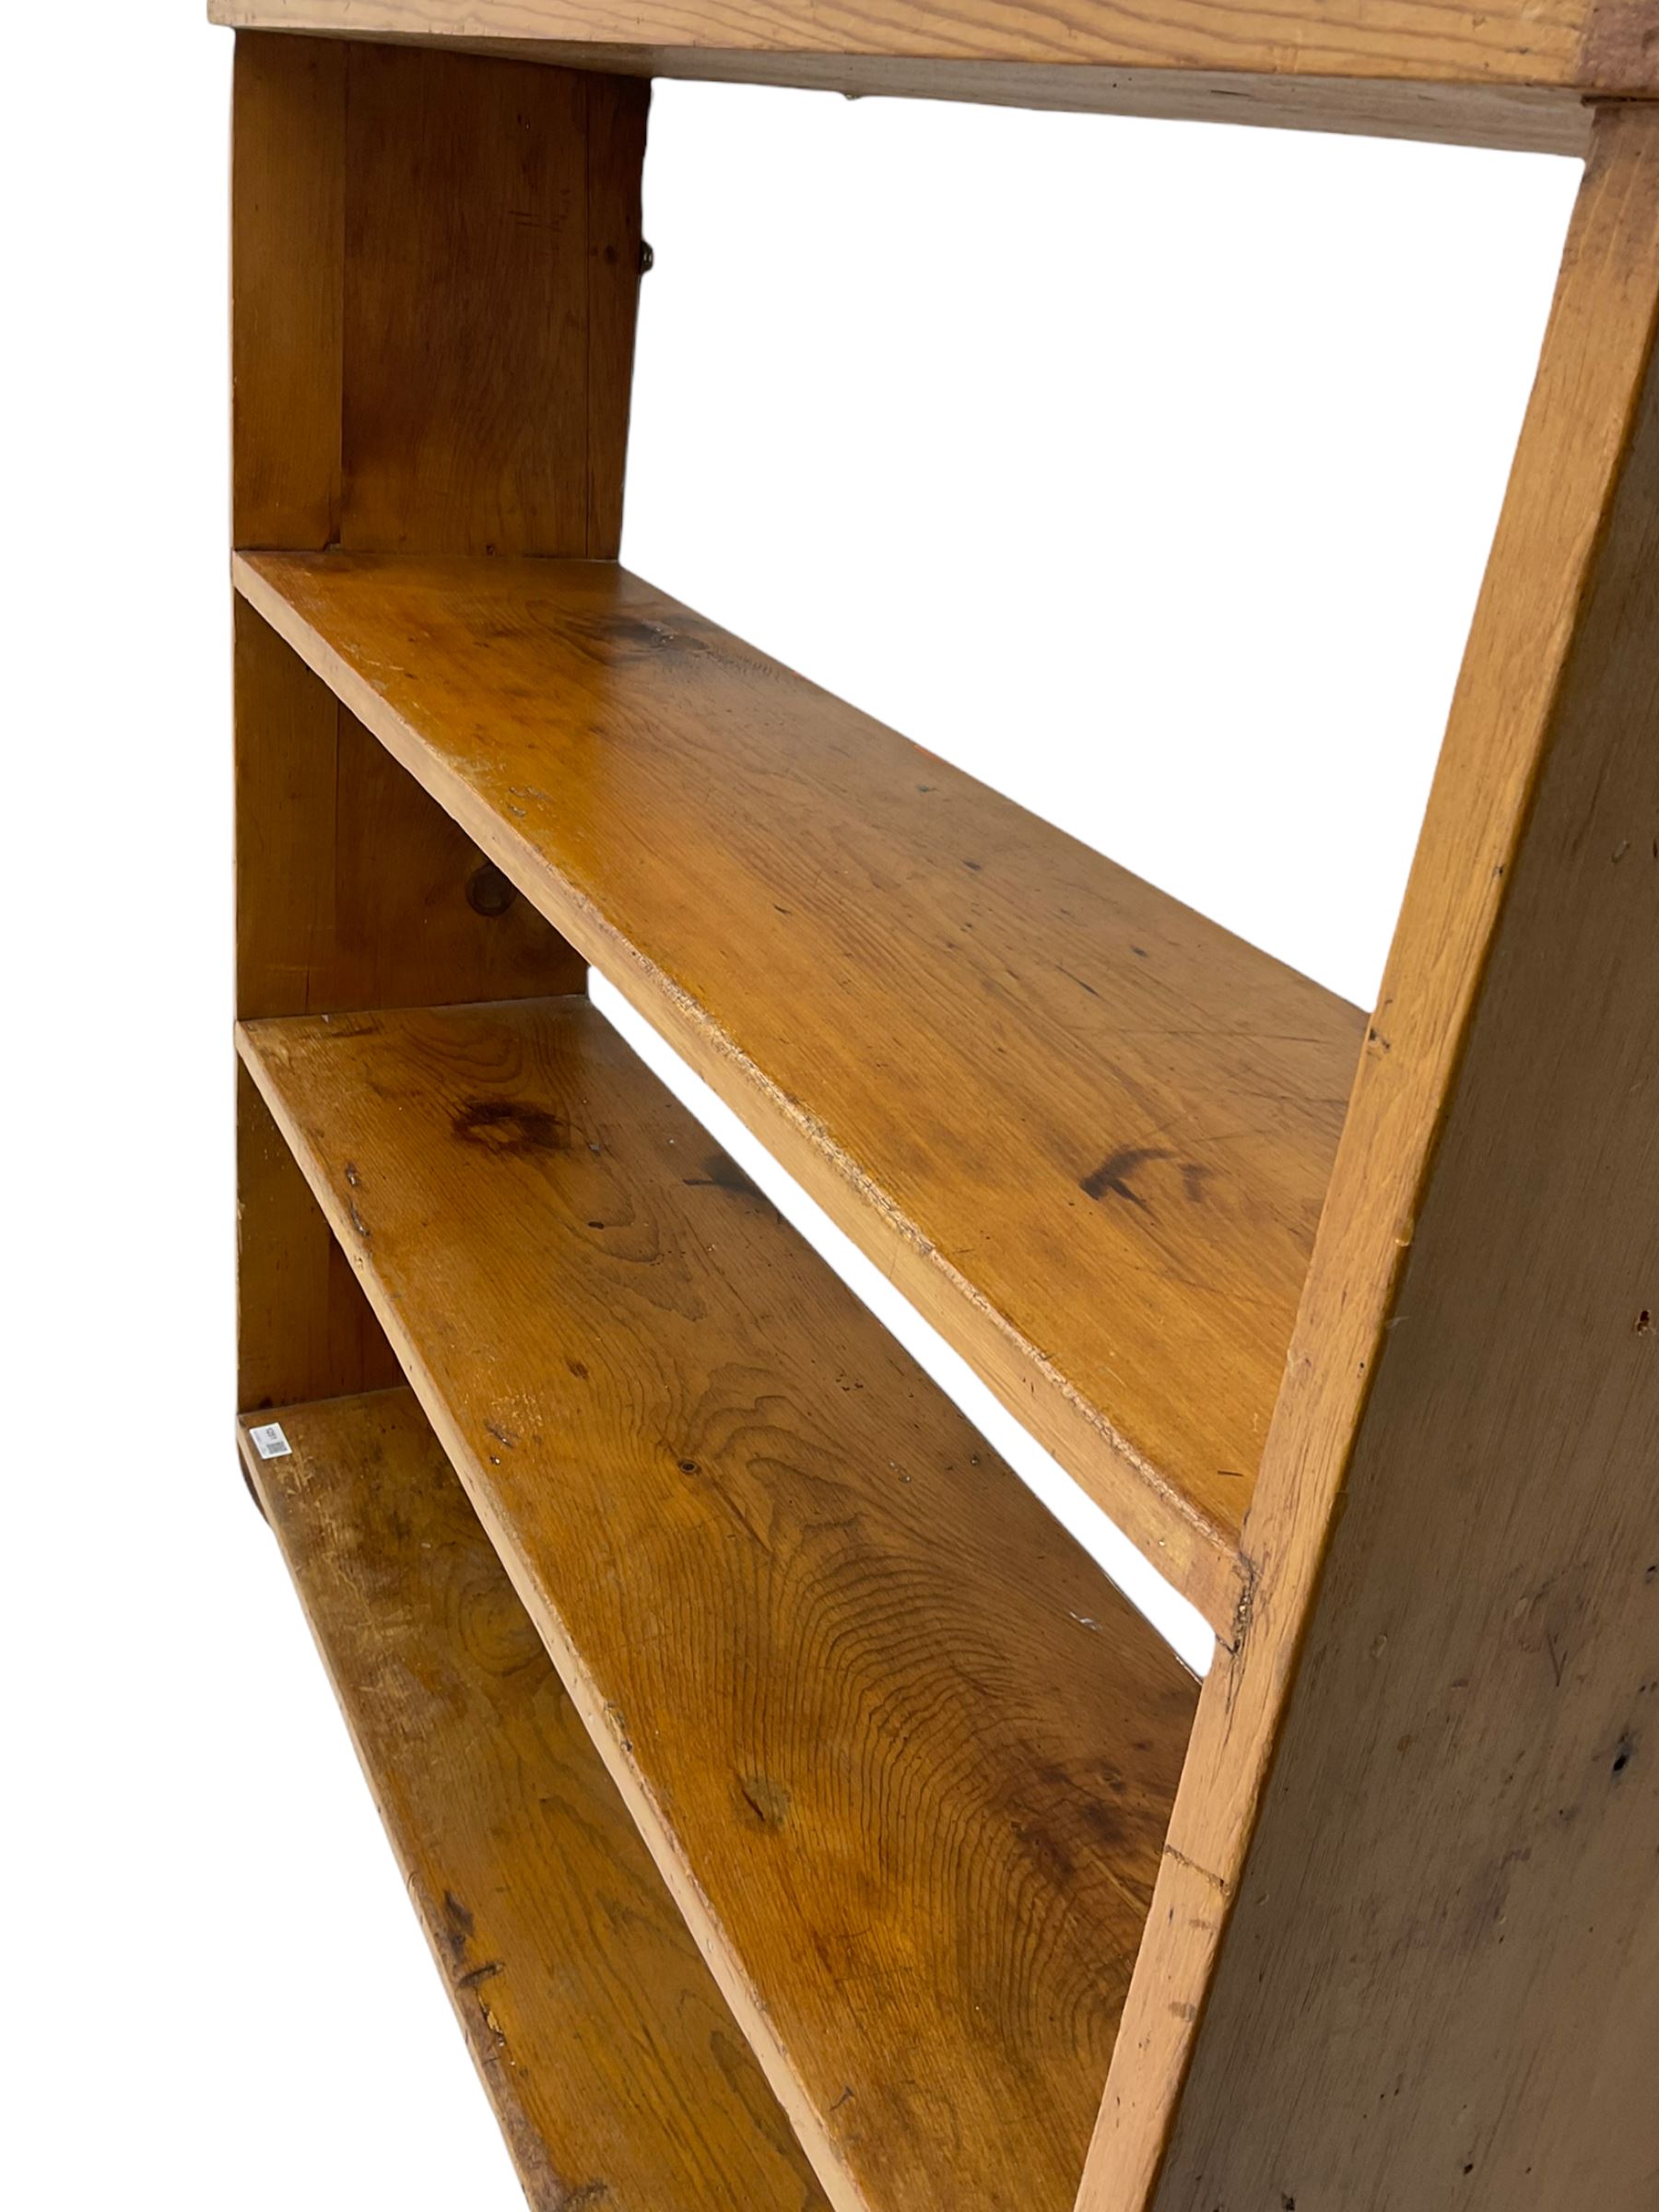 Traditional pine three tier plate rack - Image 4 of 4